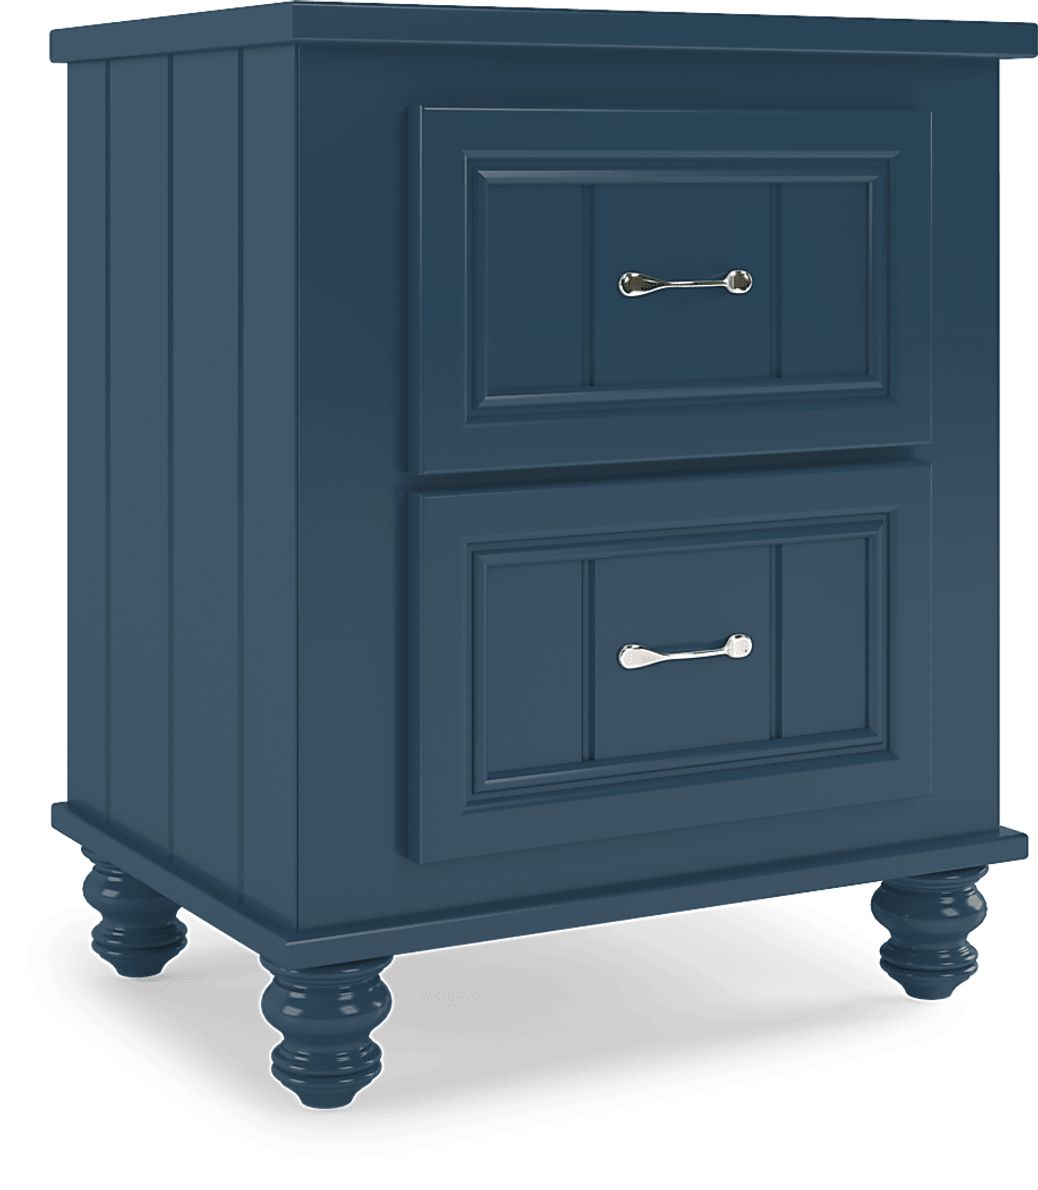 Kids Cottage Colors Navy Nightstand